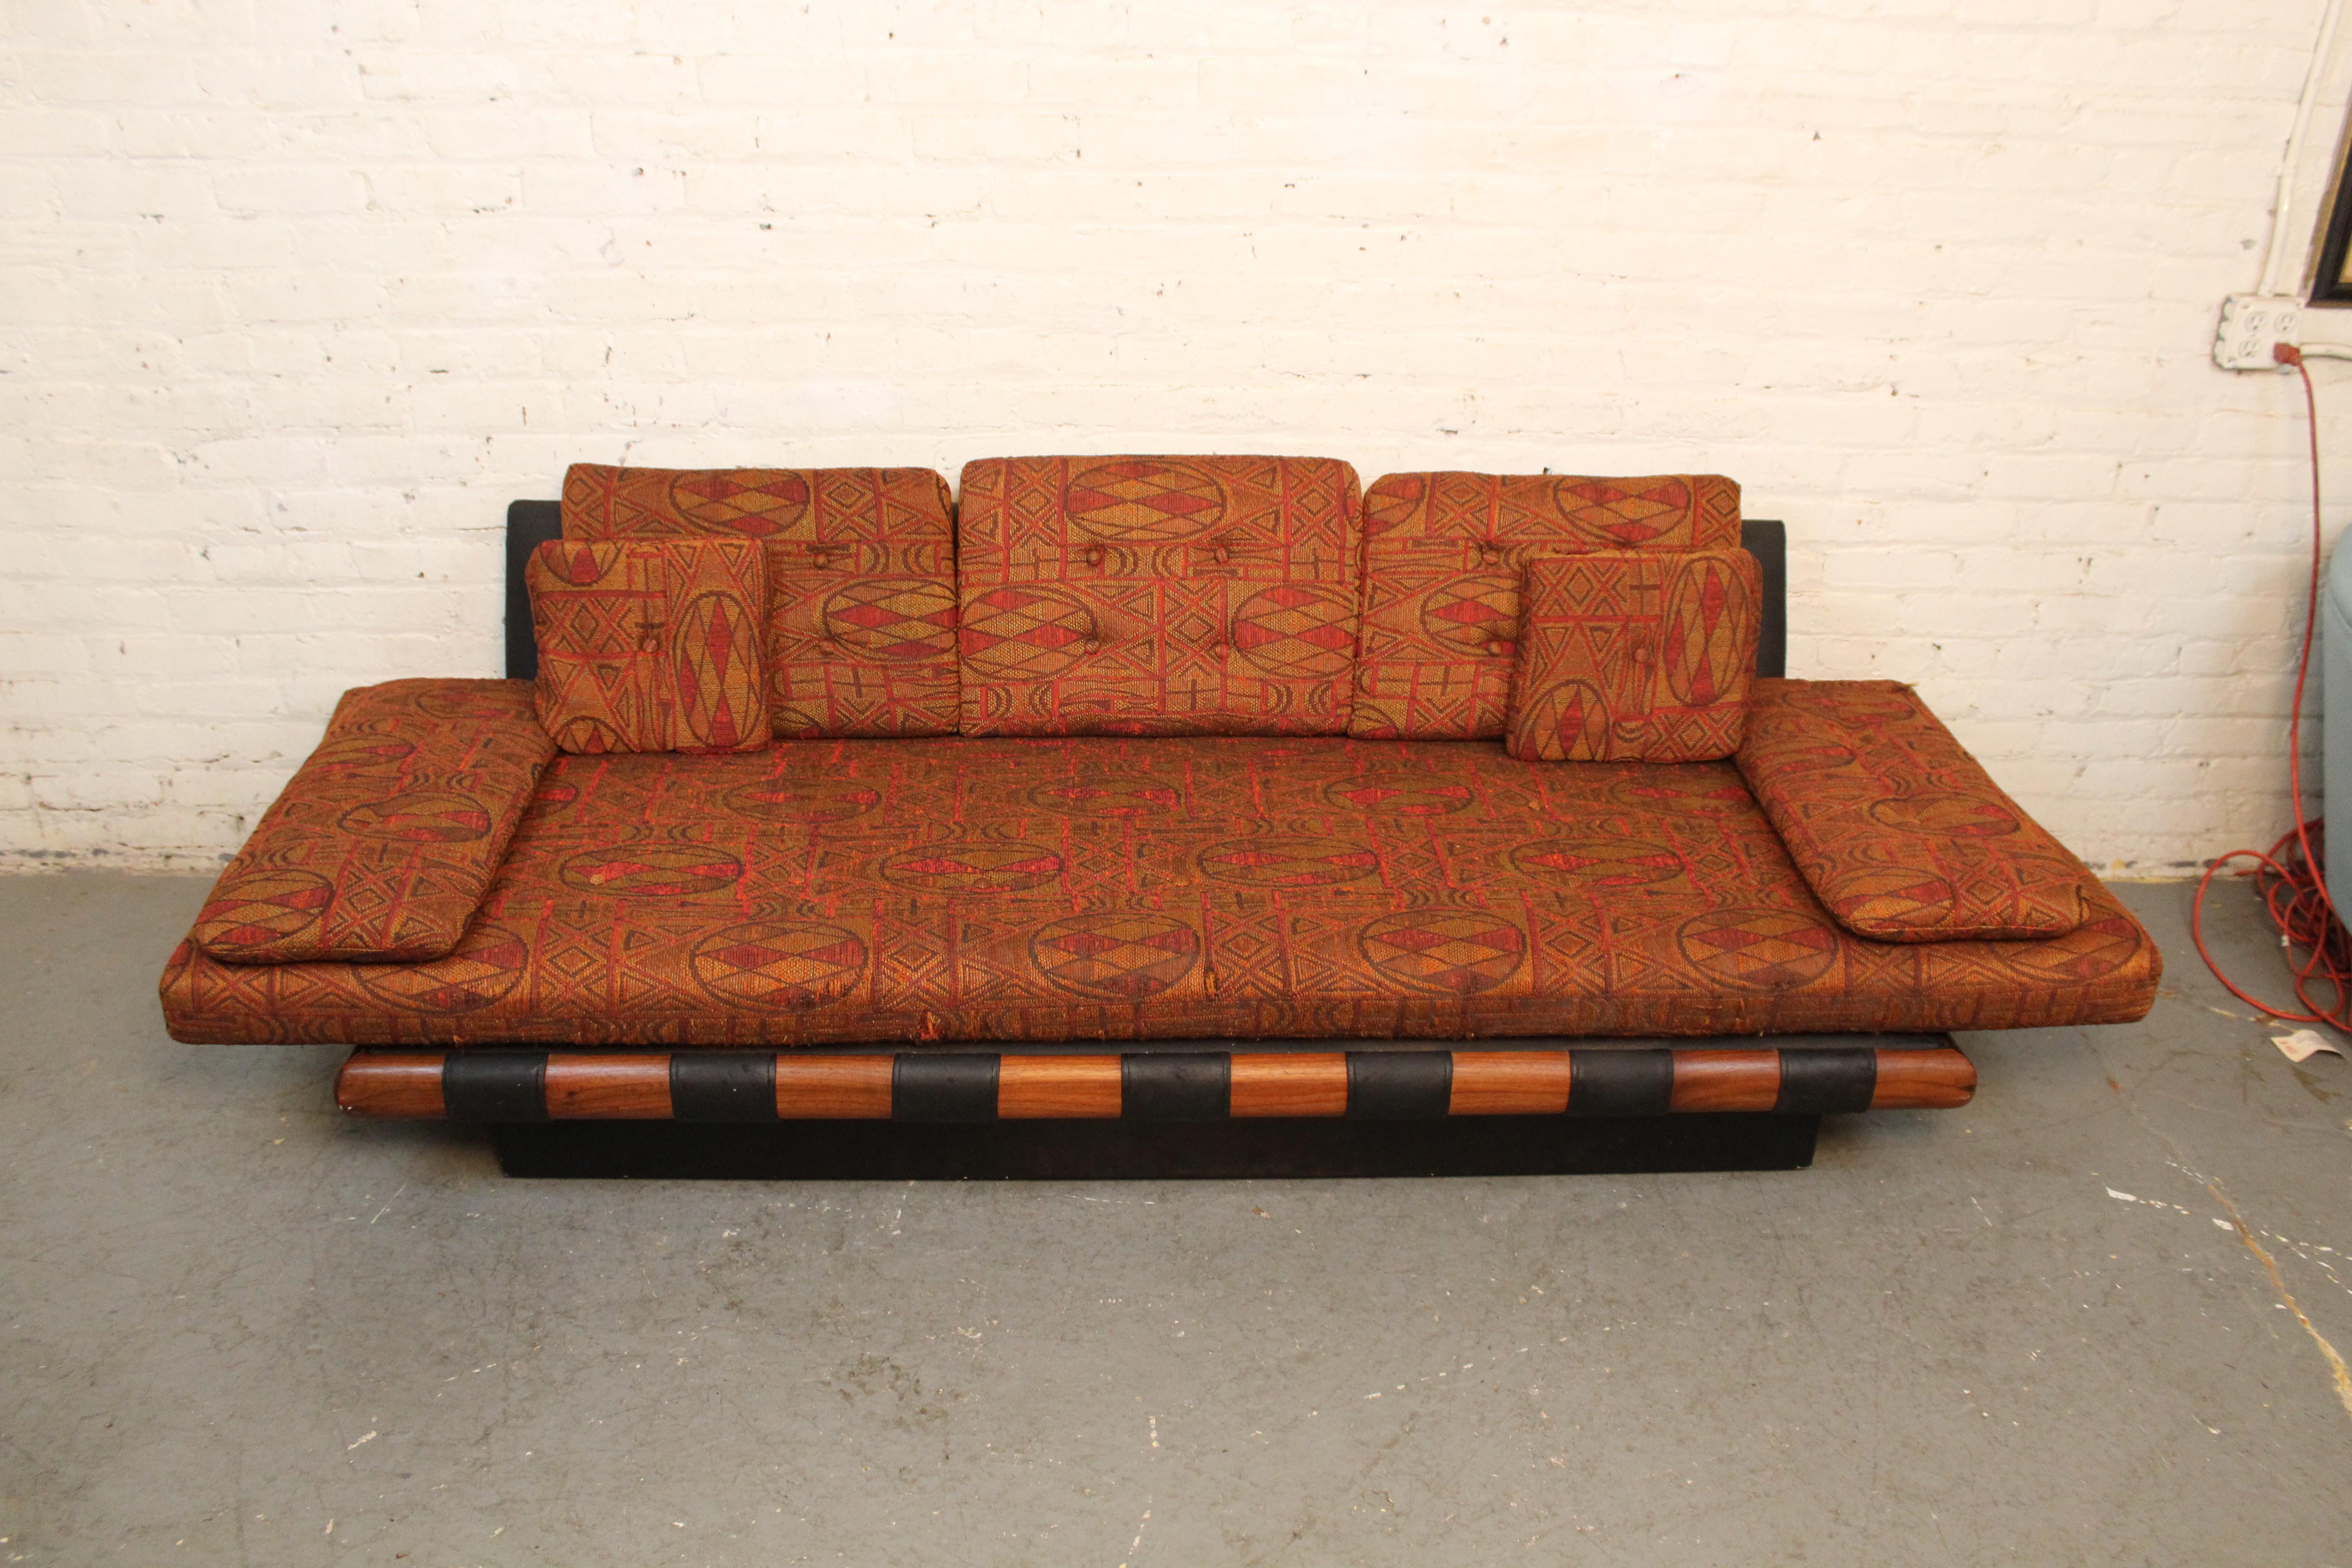 Don’t miss out on this highly unusual and intriguing sofa from the portfolio of American mid-century design master Adrian Pearsall. Manufactured for his Craft Associates brand of Wilkes-Barre, Pennsylvania, this robust plinth-base couch/daybed